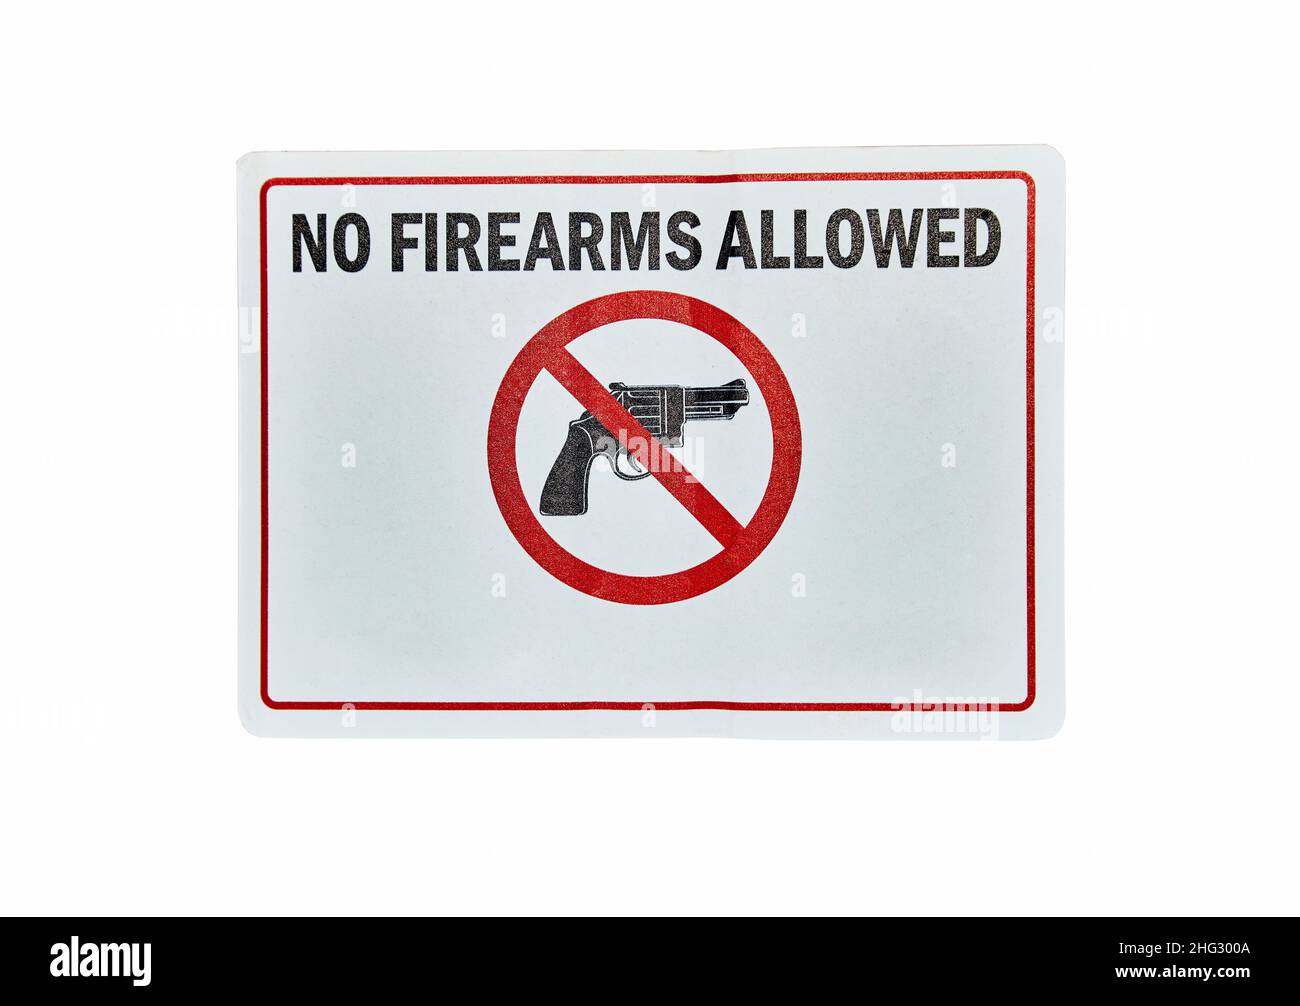 No firearms allowed sign hanging on wall Stock Photo